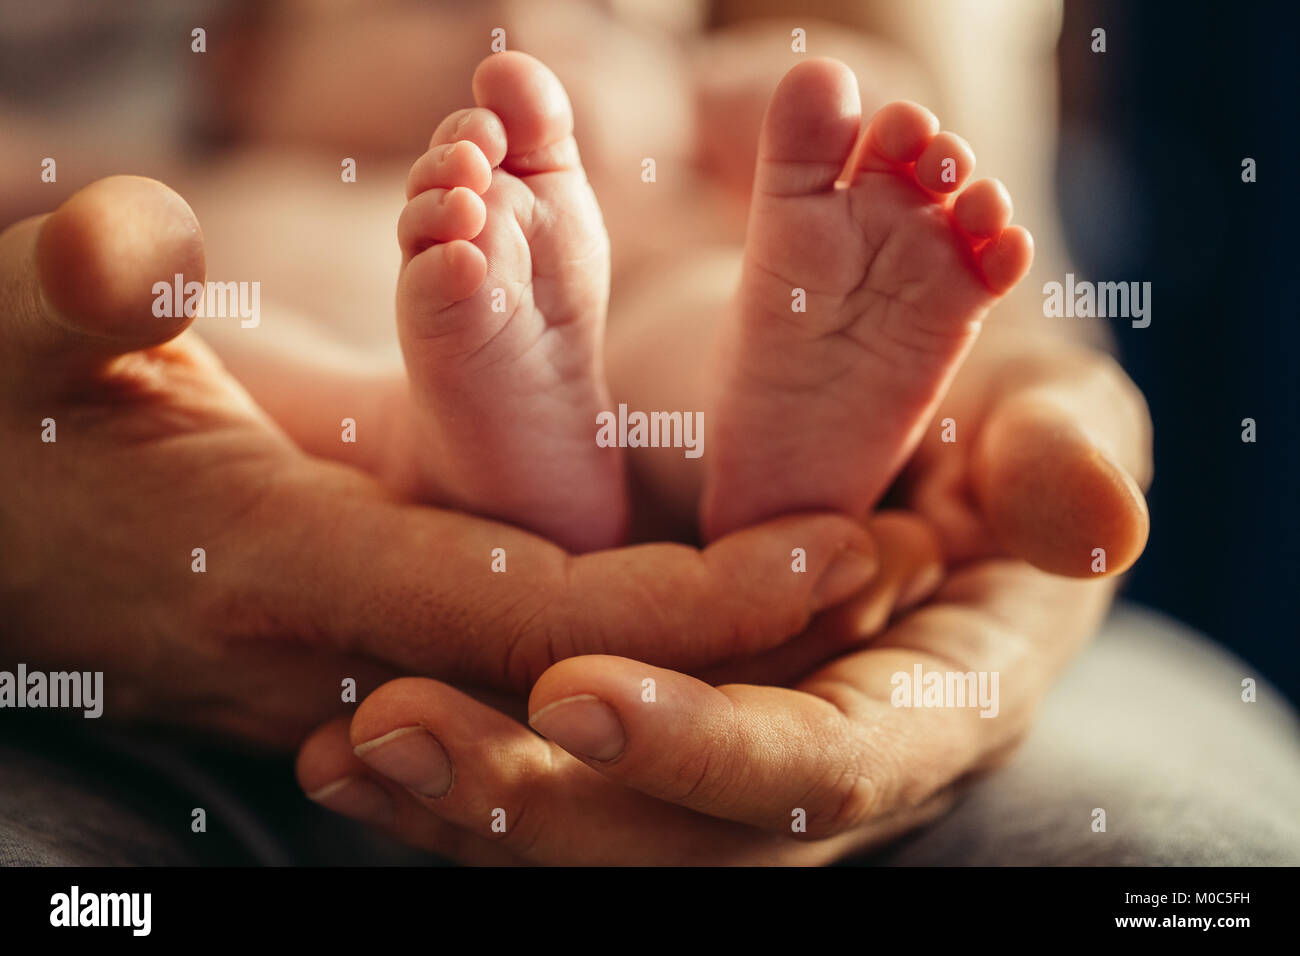 newborn baby legs in mothers lovely hand with soft focus on babie's foot Stock Photo